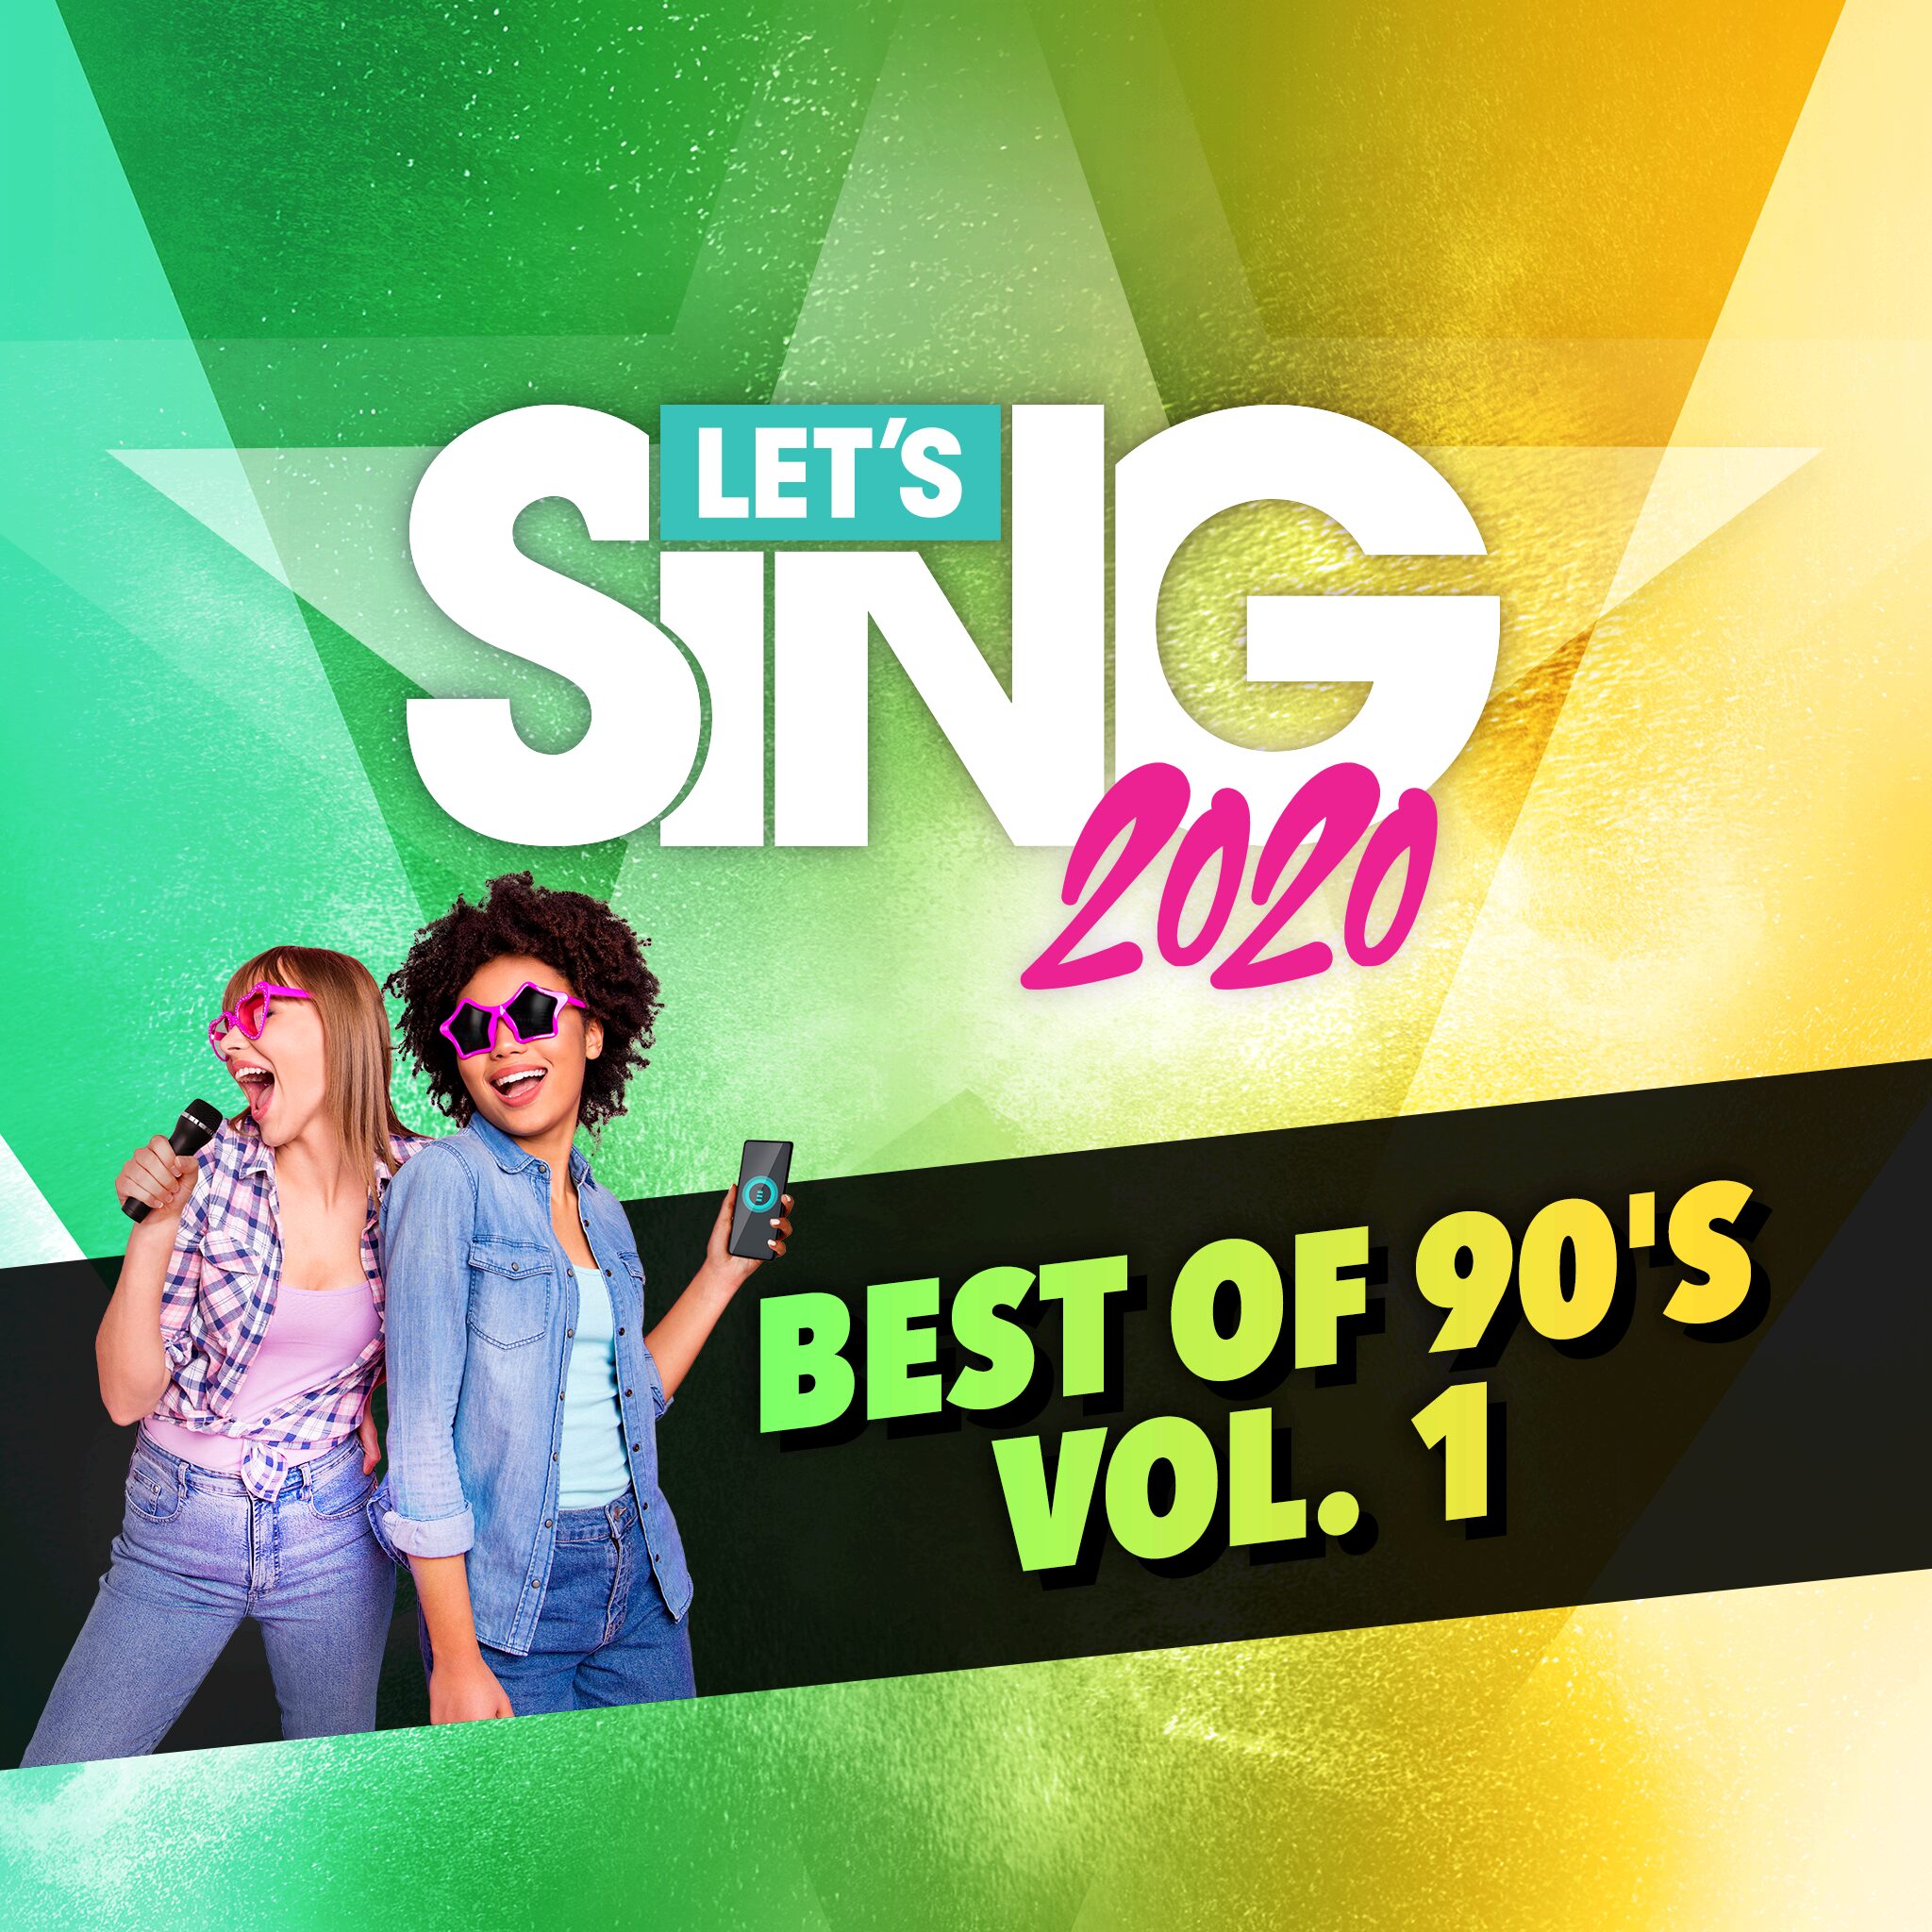 Let's Sing 2020 - Best of 90's Vol. 1 Song Pack